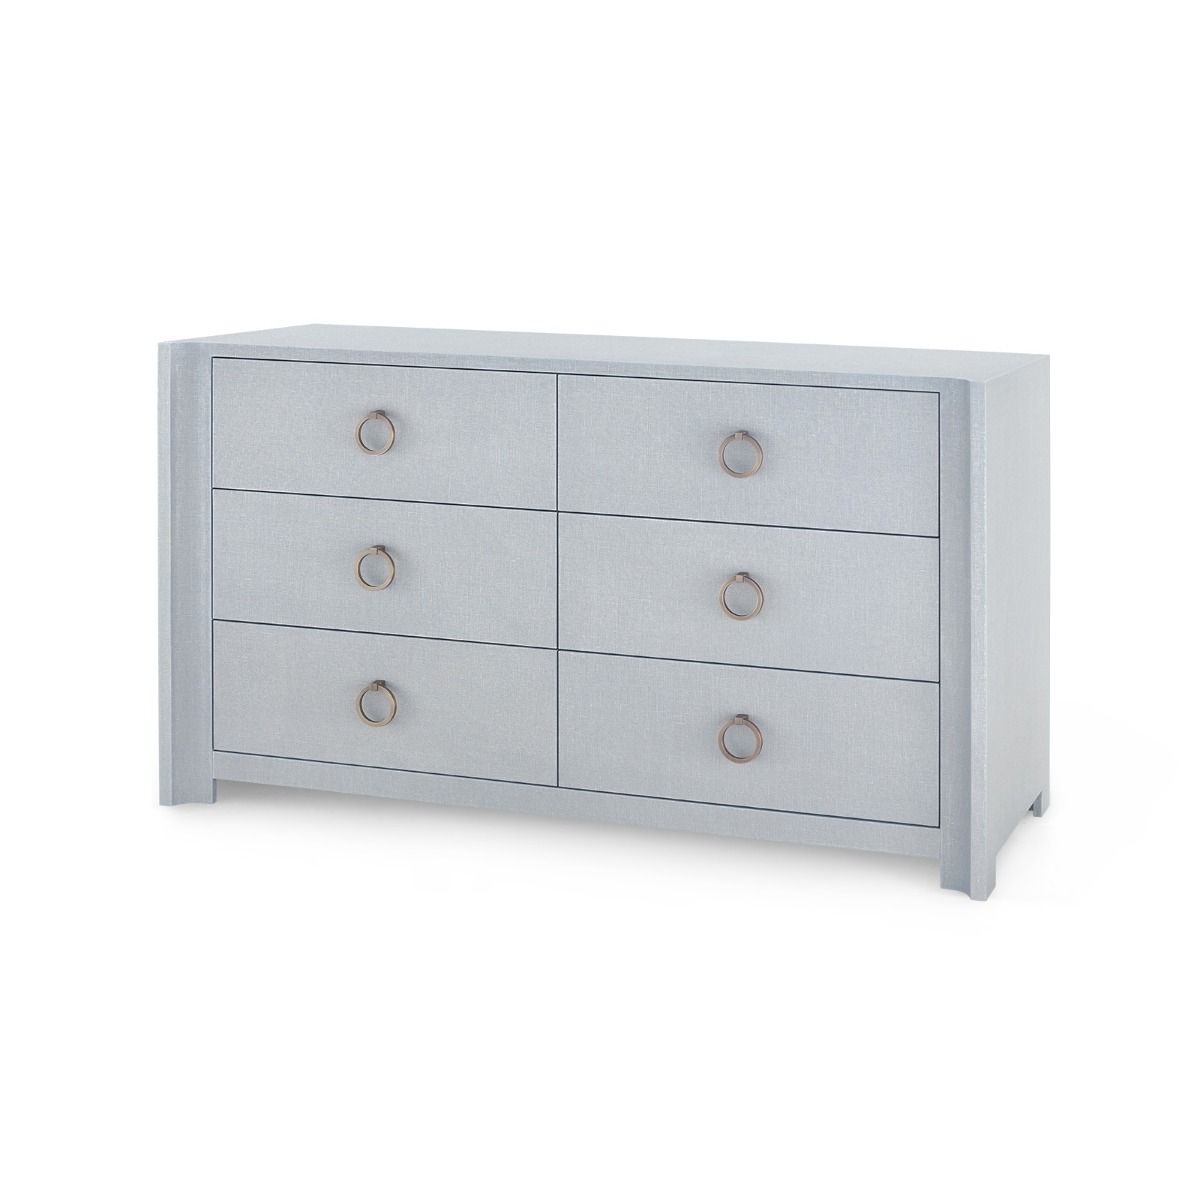 Load image into Gallery viewer, Audrey Extra Large 6-Drawer Drawer Bungalow 5     Four Hands, Burke Decor, Mid Century Modern Furniture, Old Bones Furniture Company, Old Bones Co, Modern Mid Century, Designer Furniture, https://www.oldbonesco.com/
